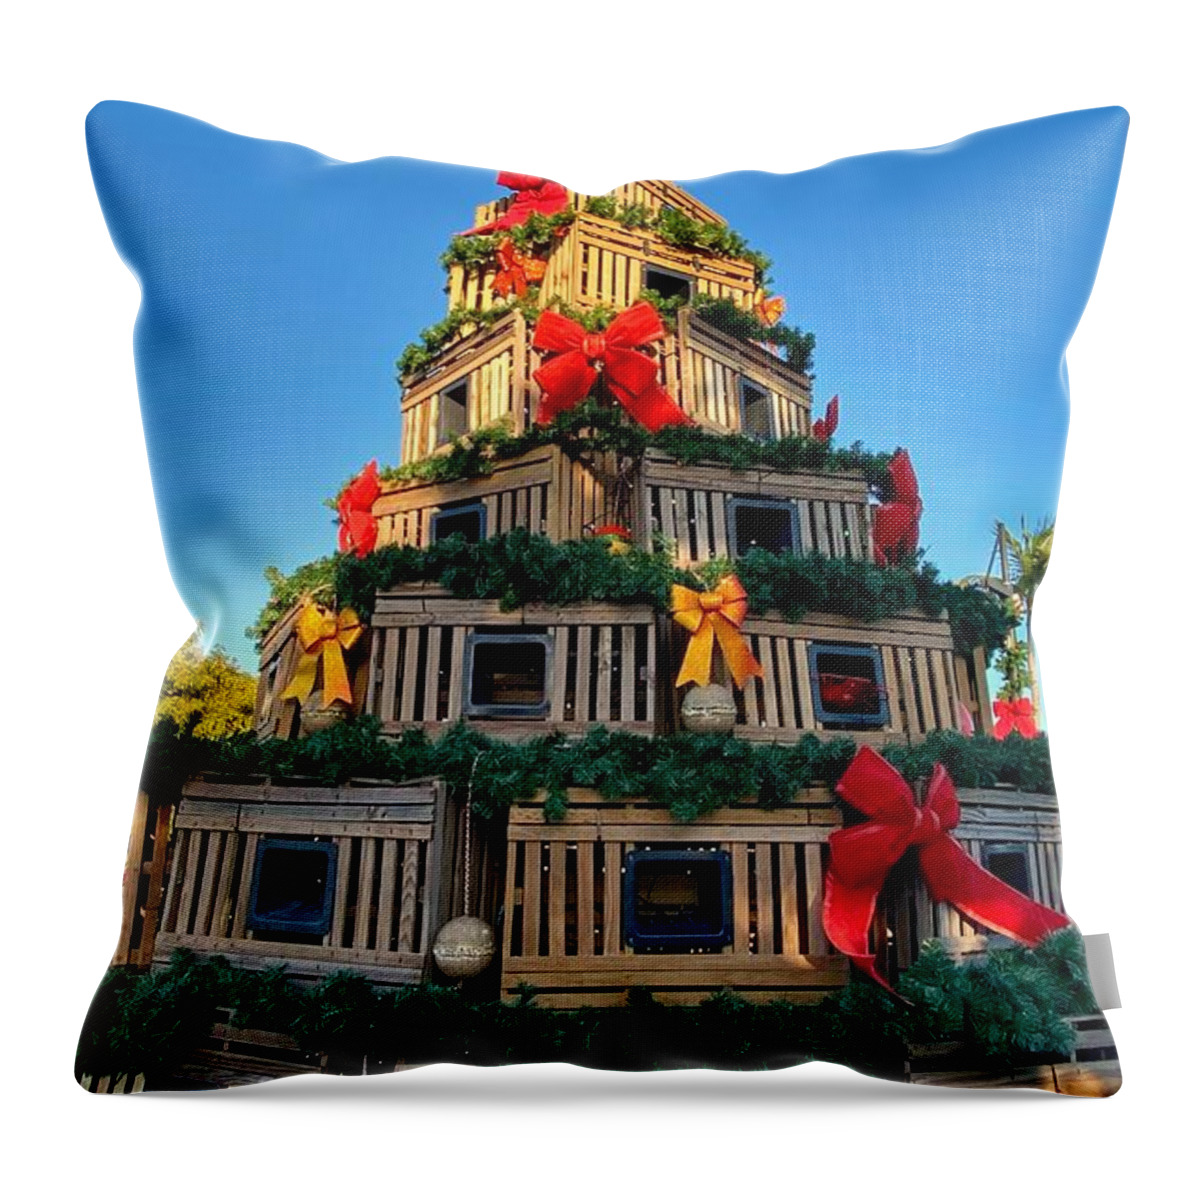 Lobster Throw Pillow featuring the photograph Lobster Trap Christmas Tree by Monika Salvan